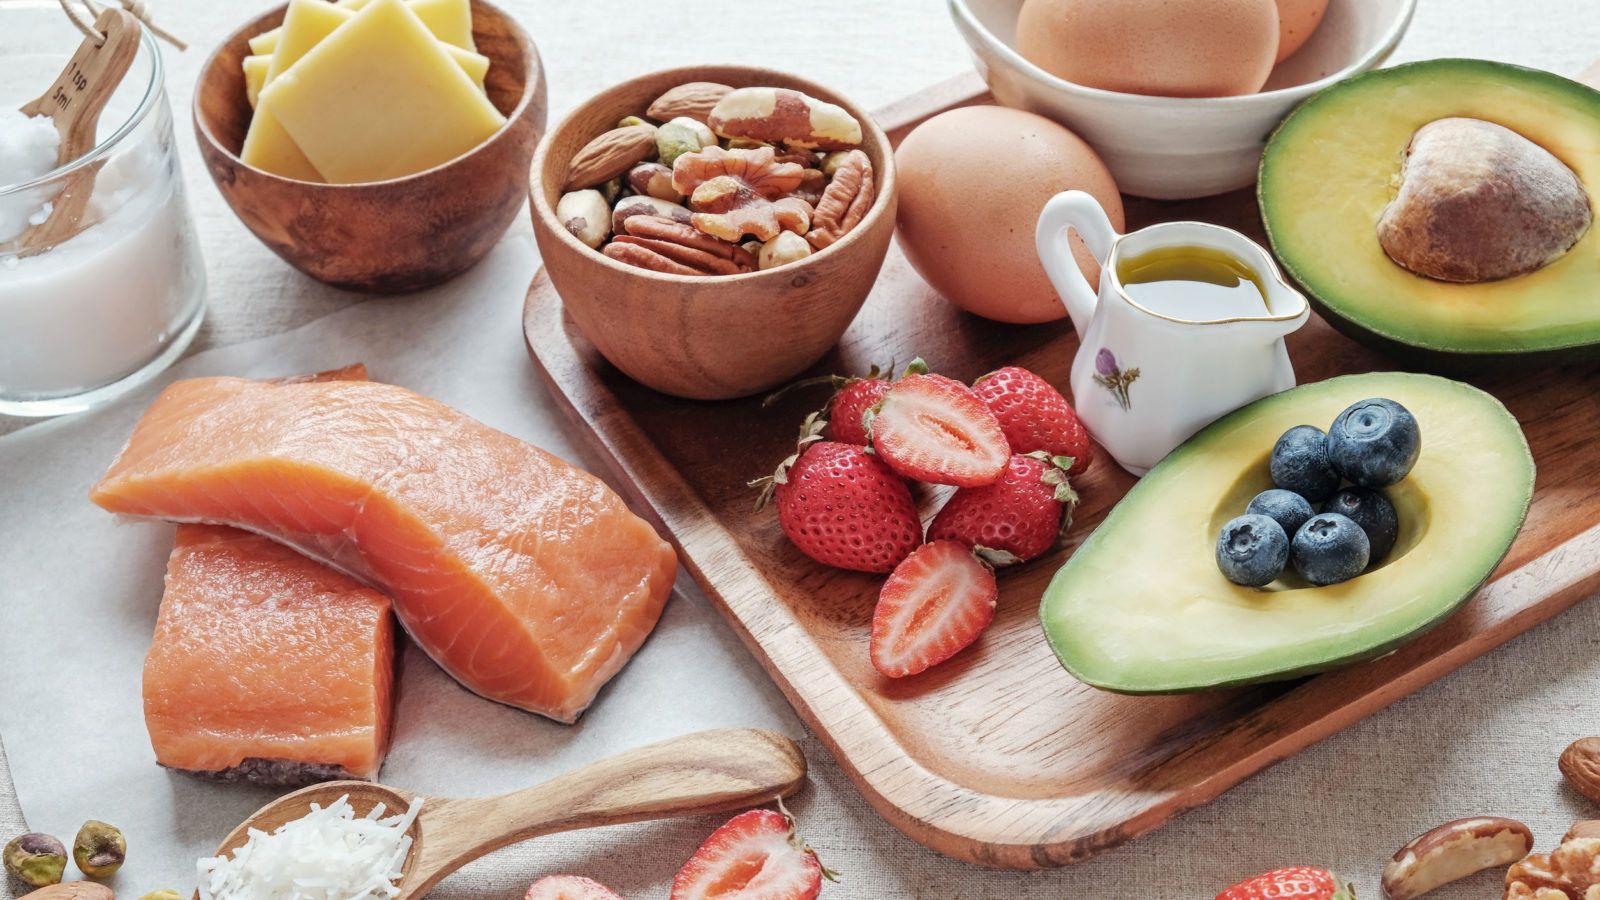 The Keto Diet: Benefits and Why it Works